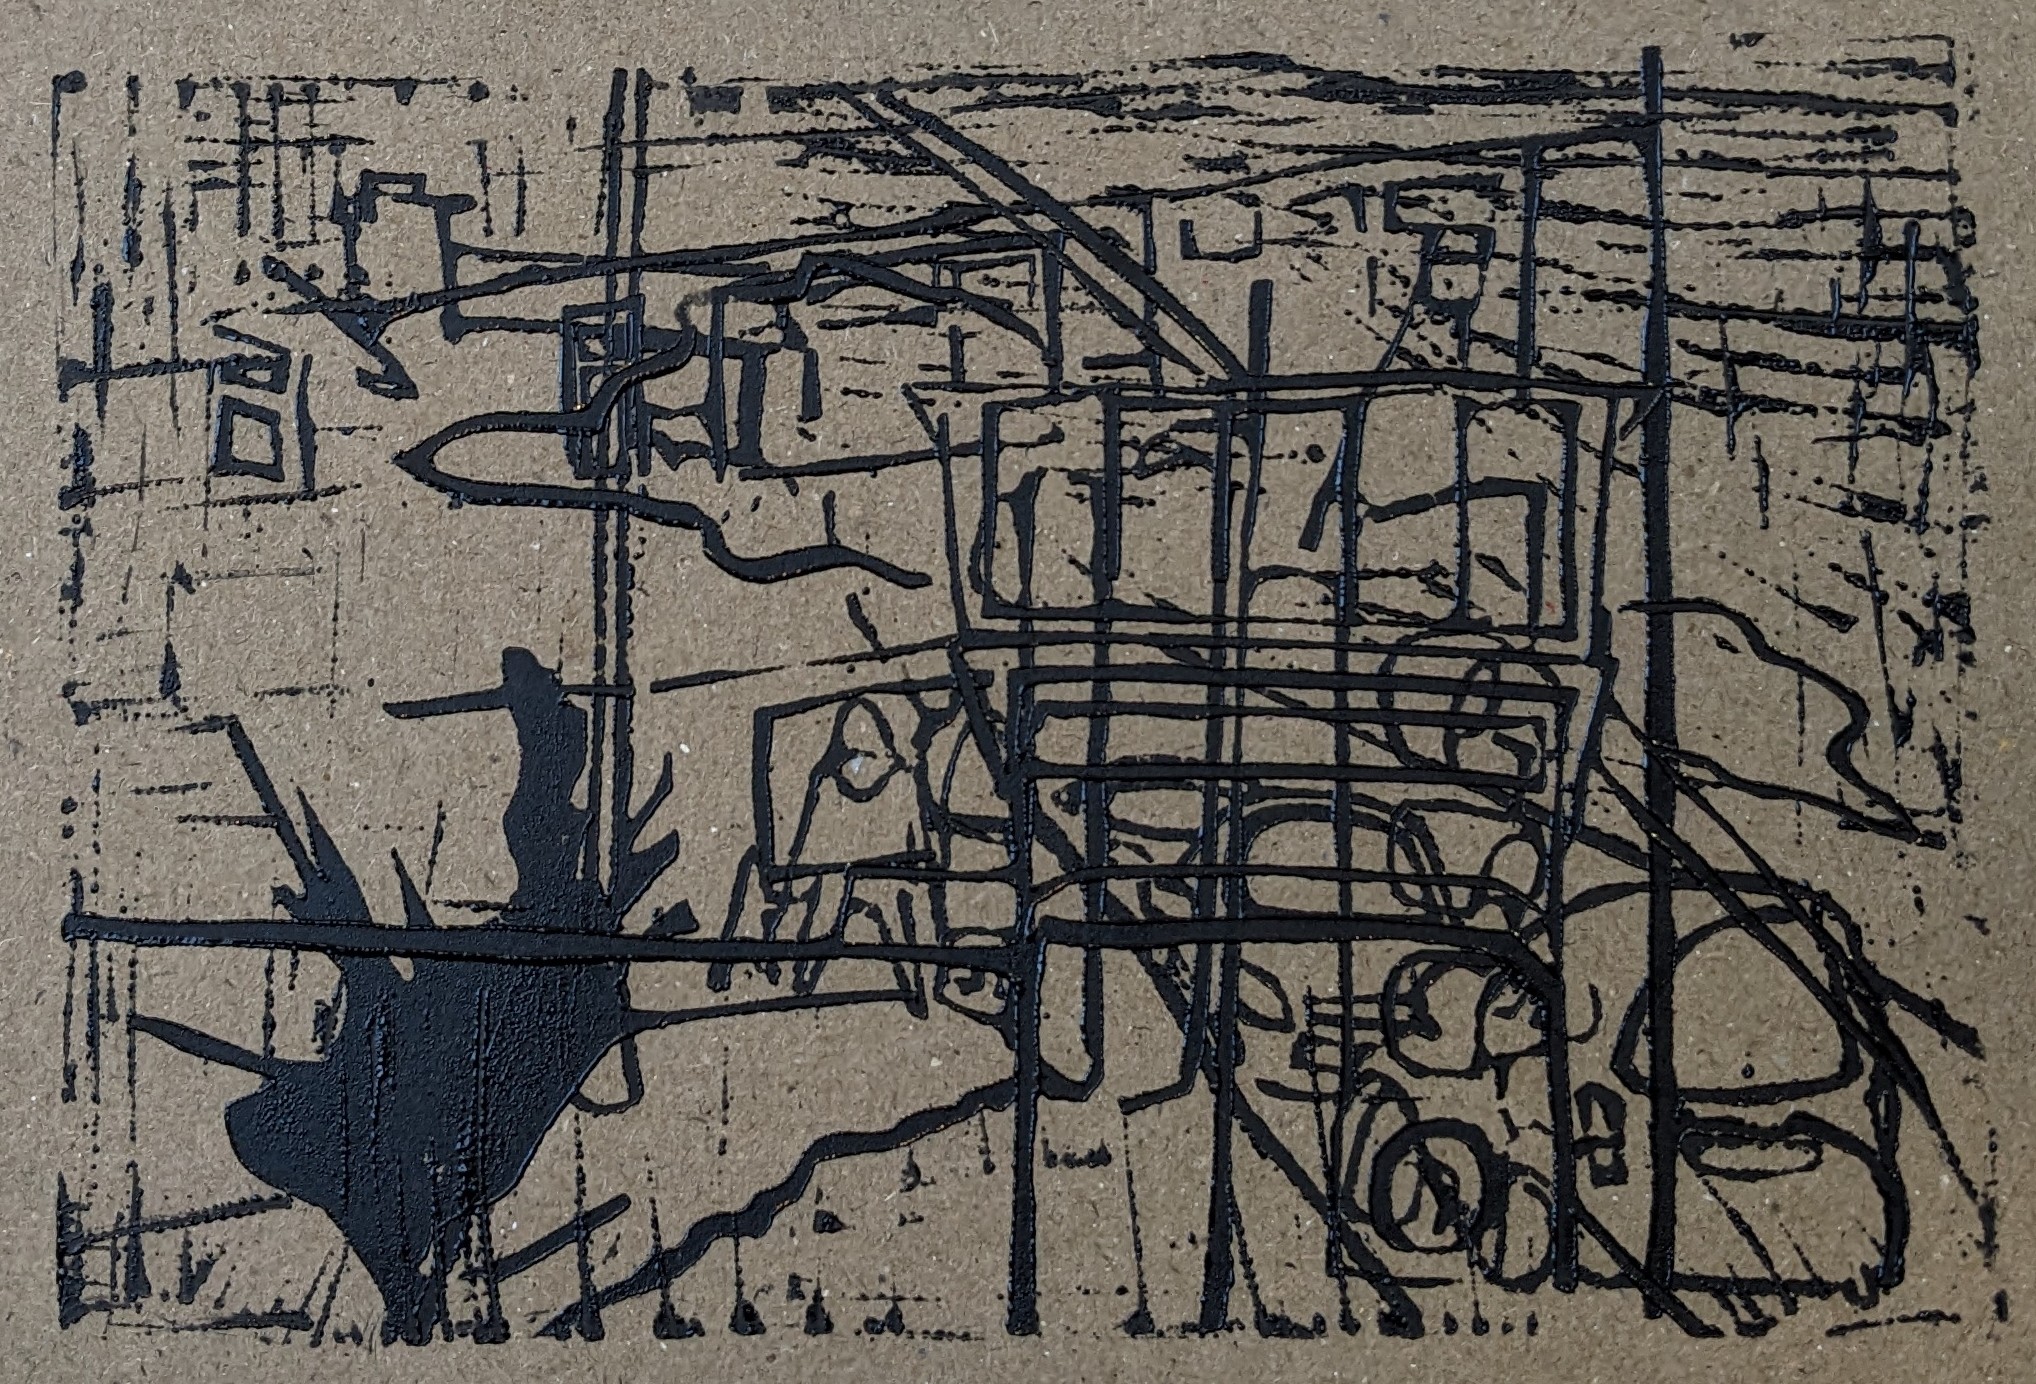 An abstract black lino print on brown paper of three different prints of outdoors life drawings layered over each other. Parked cars, a bush and a parent and child walking can be seen.